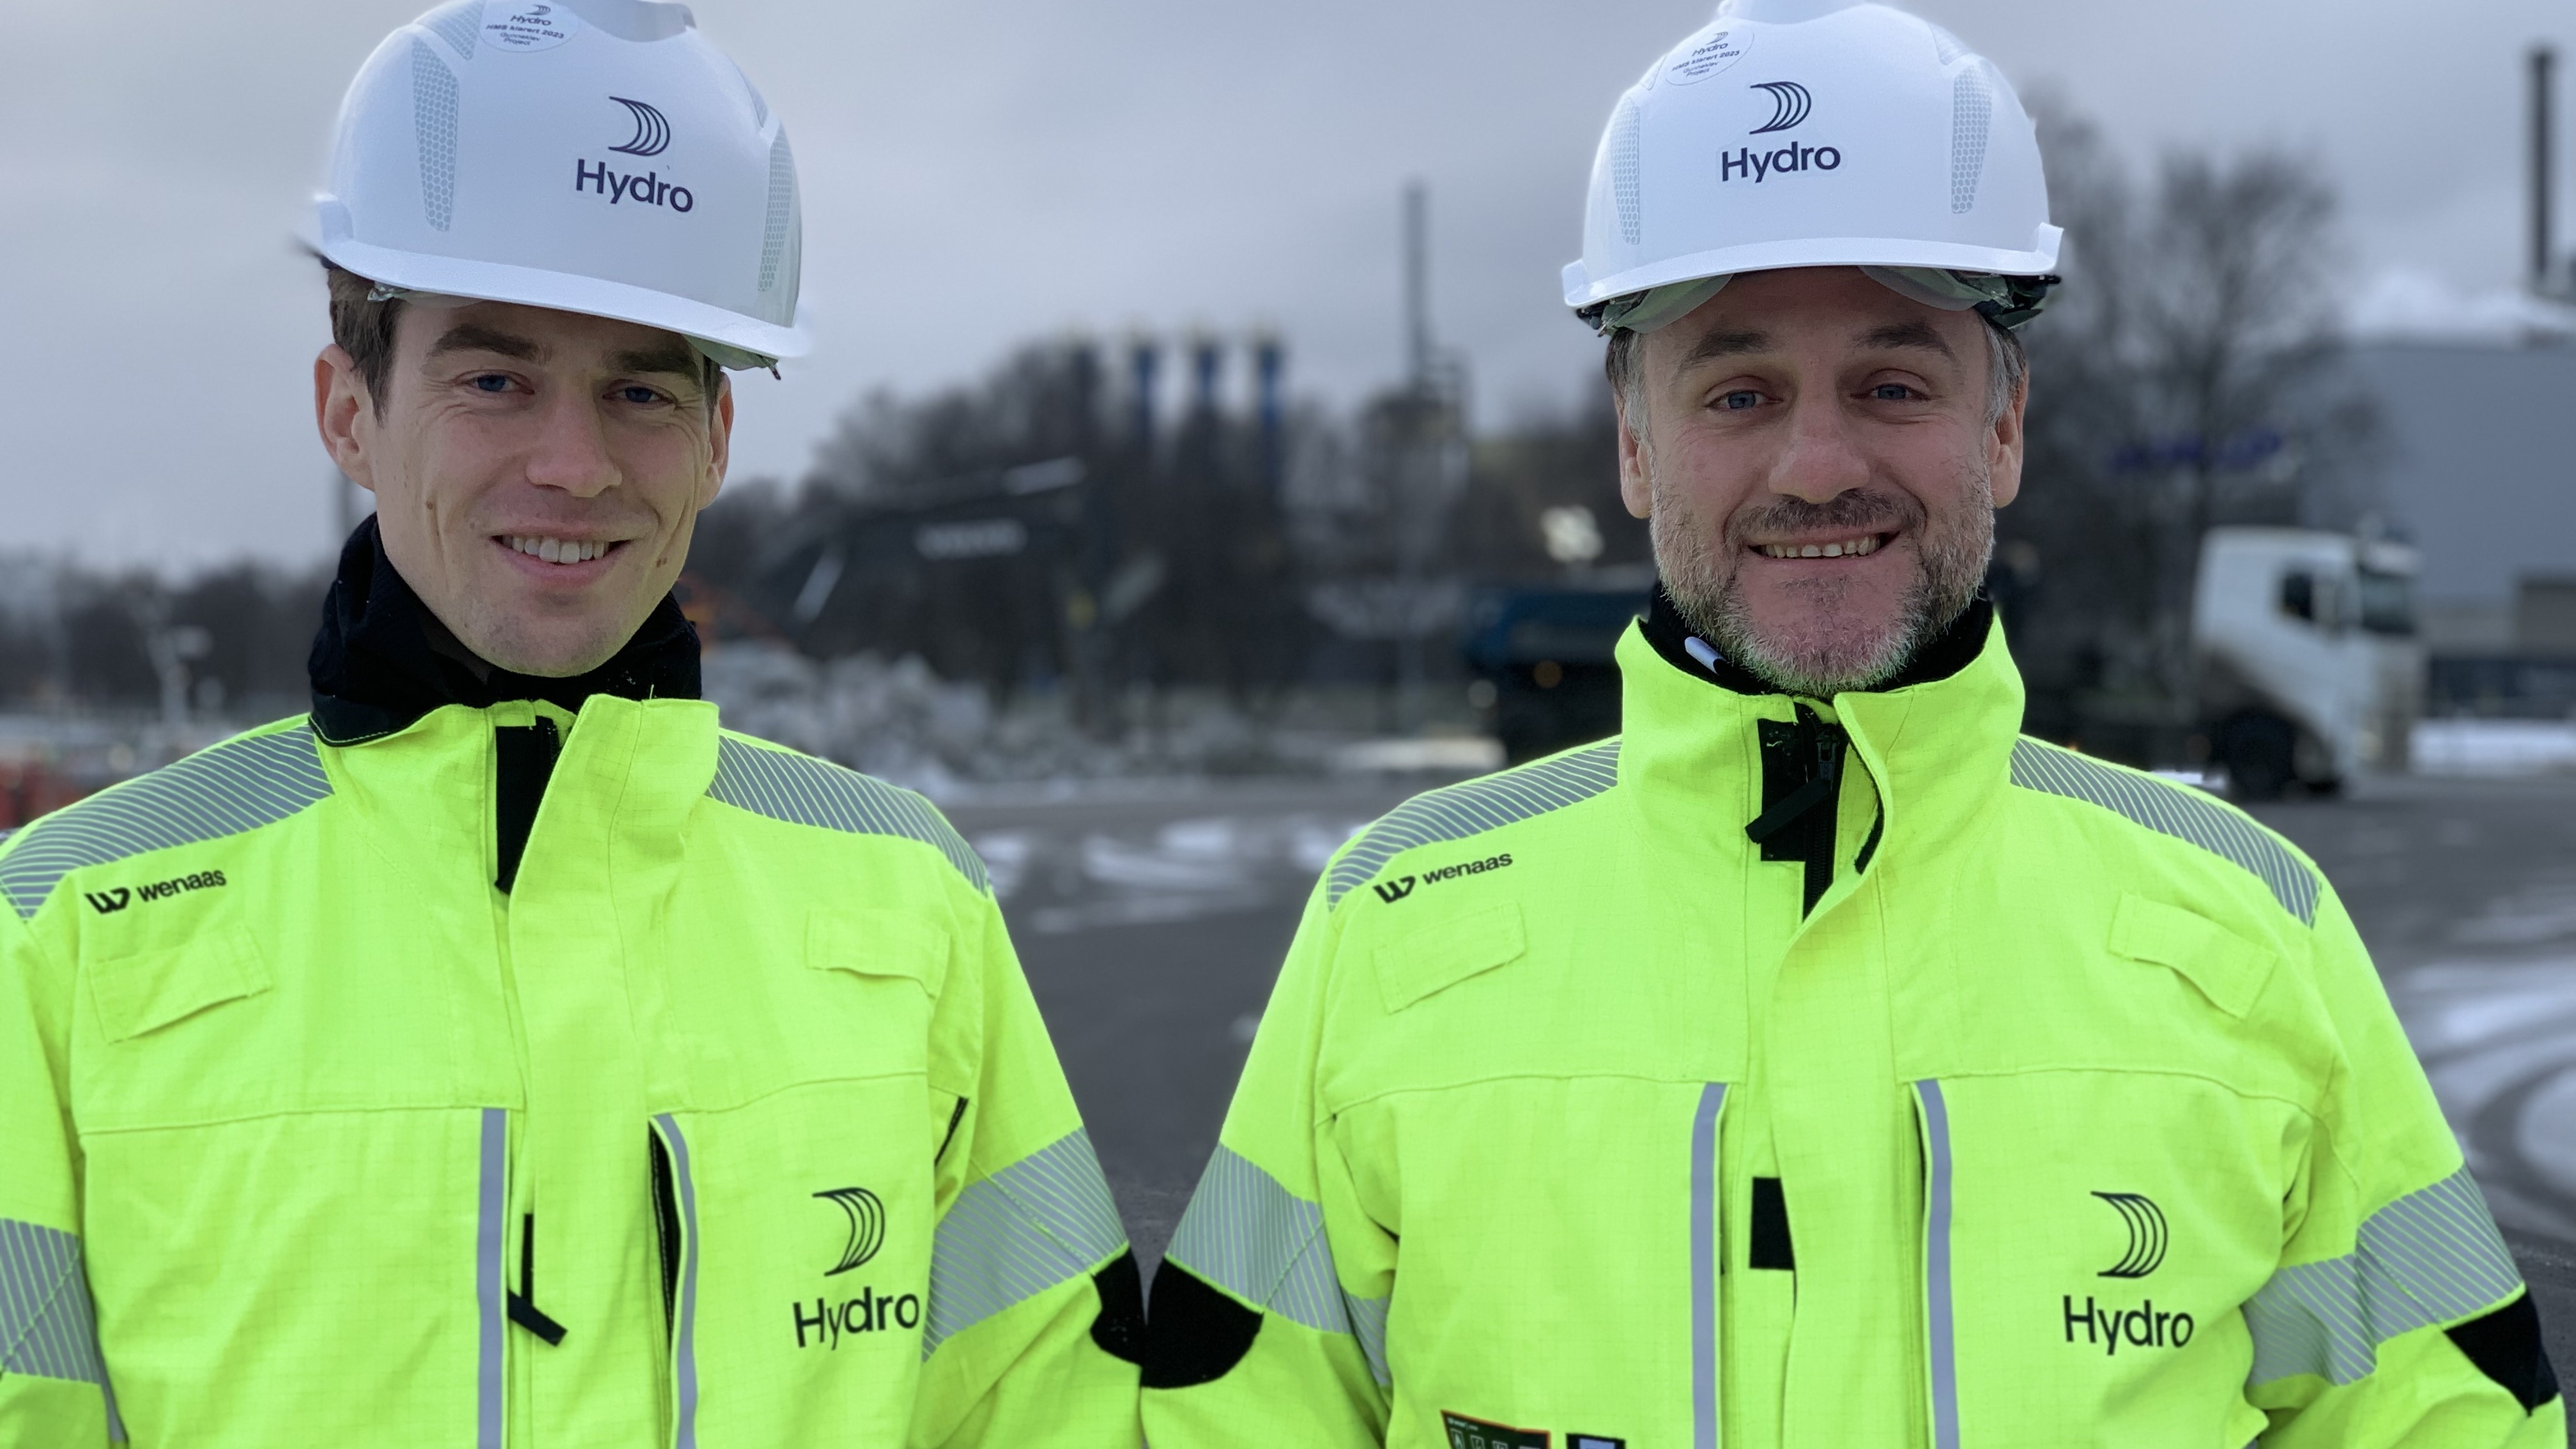 two men, portrait, posing, white helmet, yellow jackets, construction site, large vehicles and escavator in background, fjord